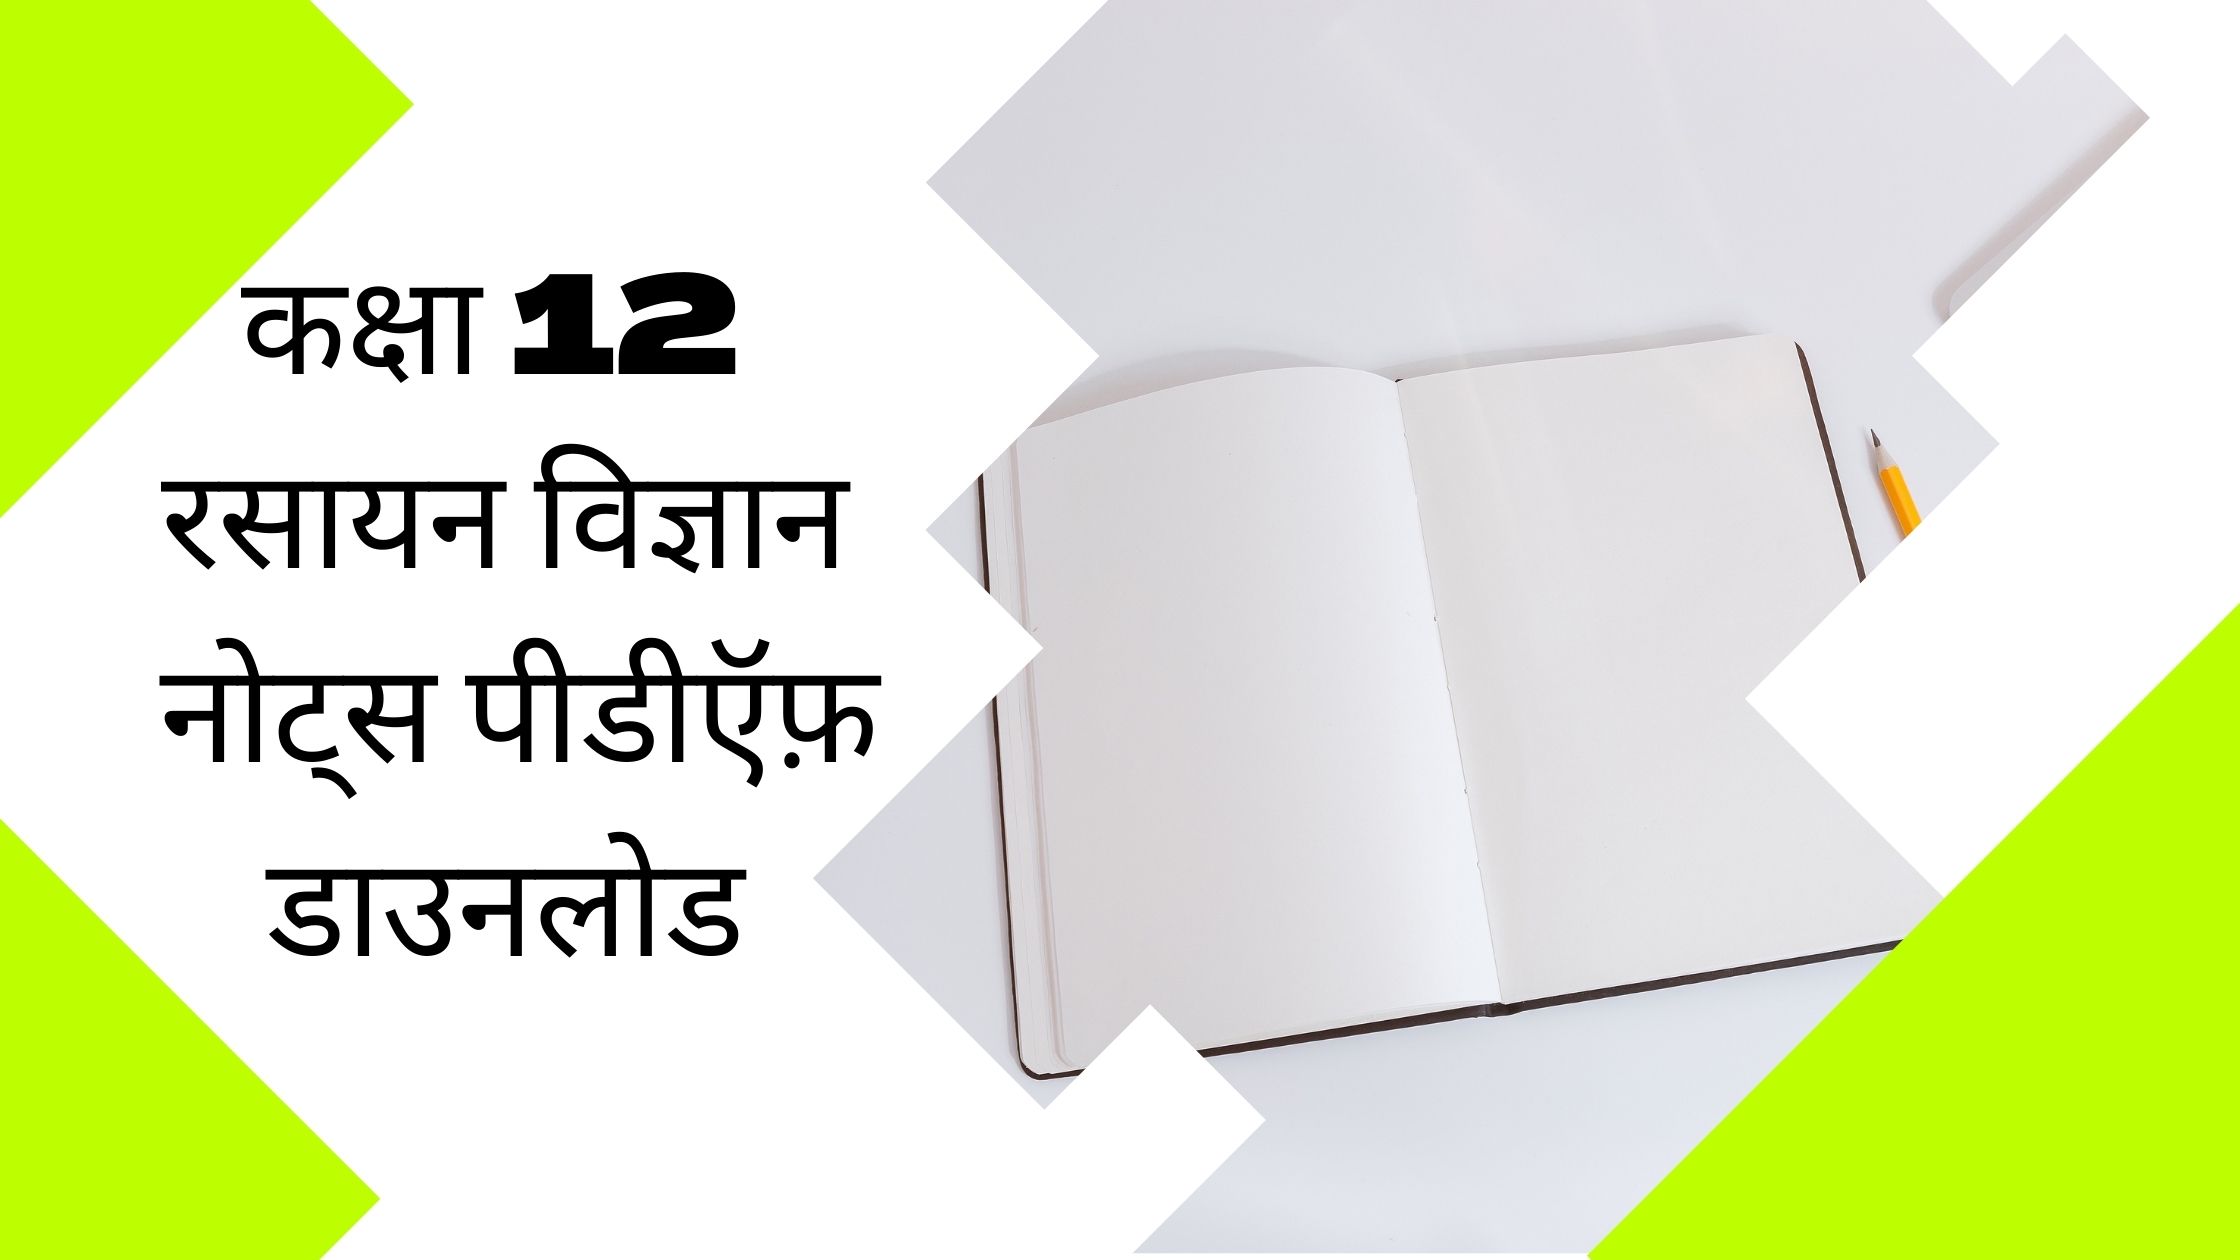 12th chemistry pdf download in hindi